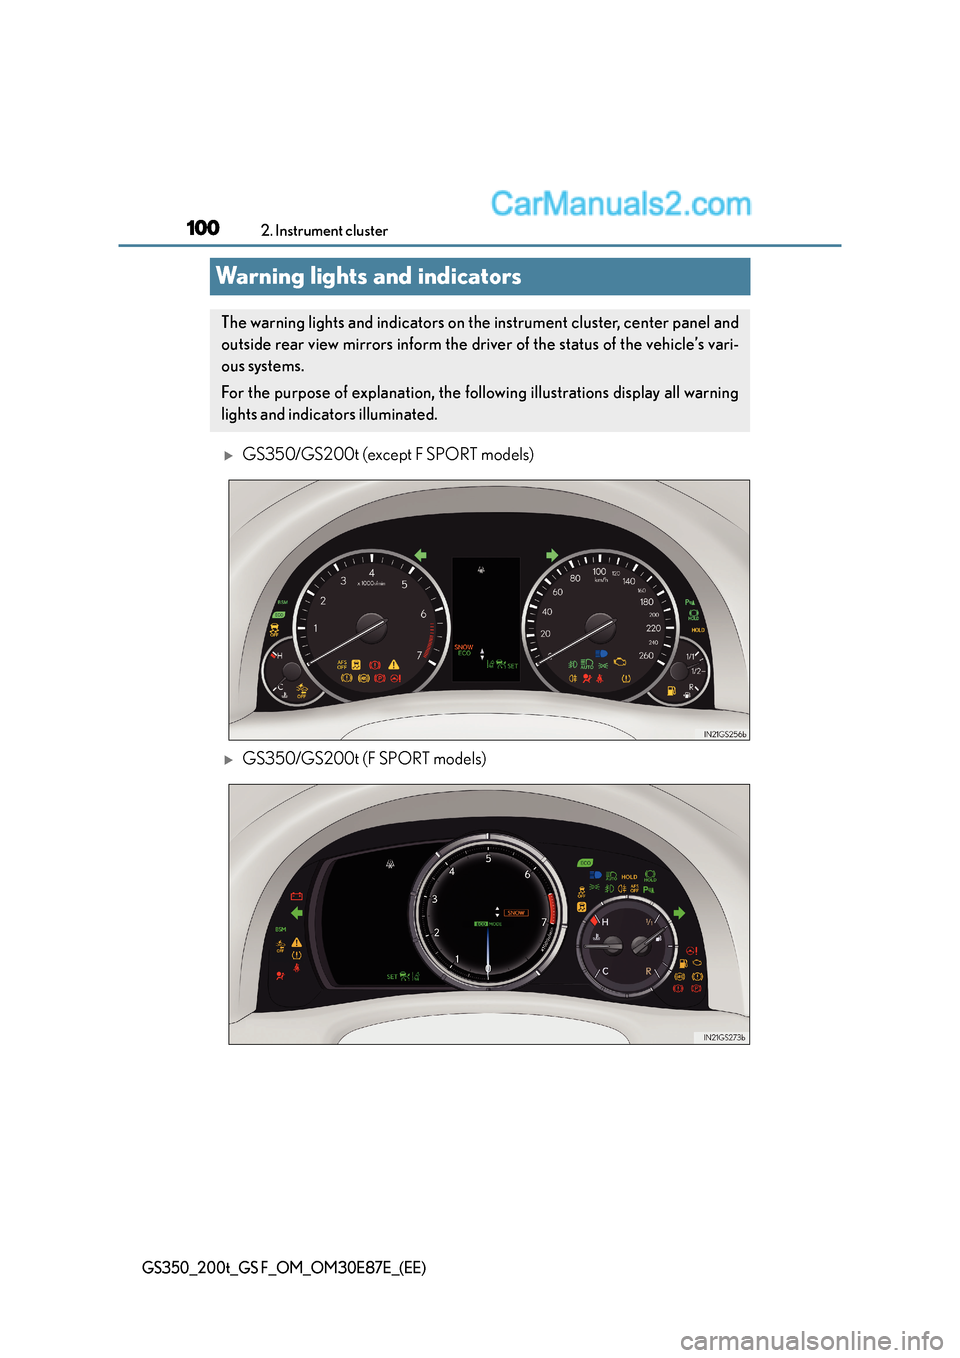 Lexus GS F 2015  s User Guide 1002. Instrument cluster
GS350_200t_GS F_OM_OM30E87E_(EE)
Warning lights and indicators
�XGS350/GS200t (except F SPORT models)
�XGS350/GS200t (F SPORT models)
The warning lights and indicators on the 